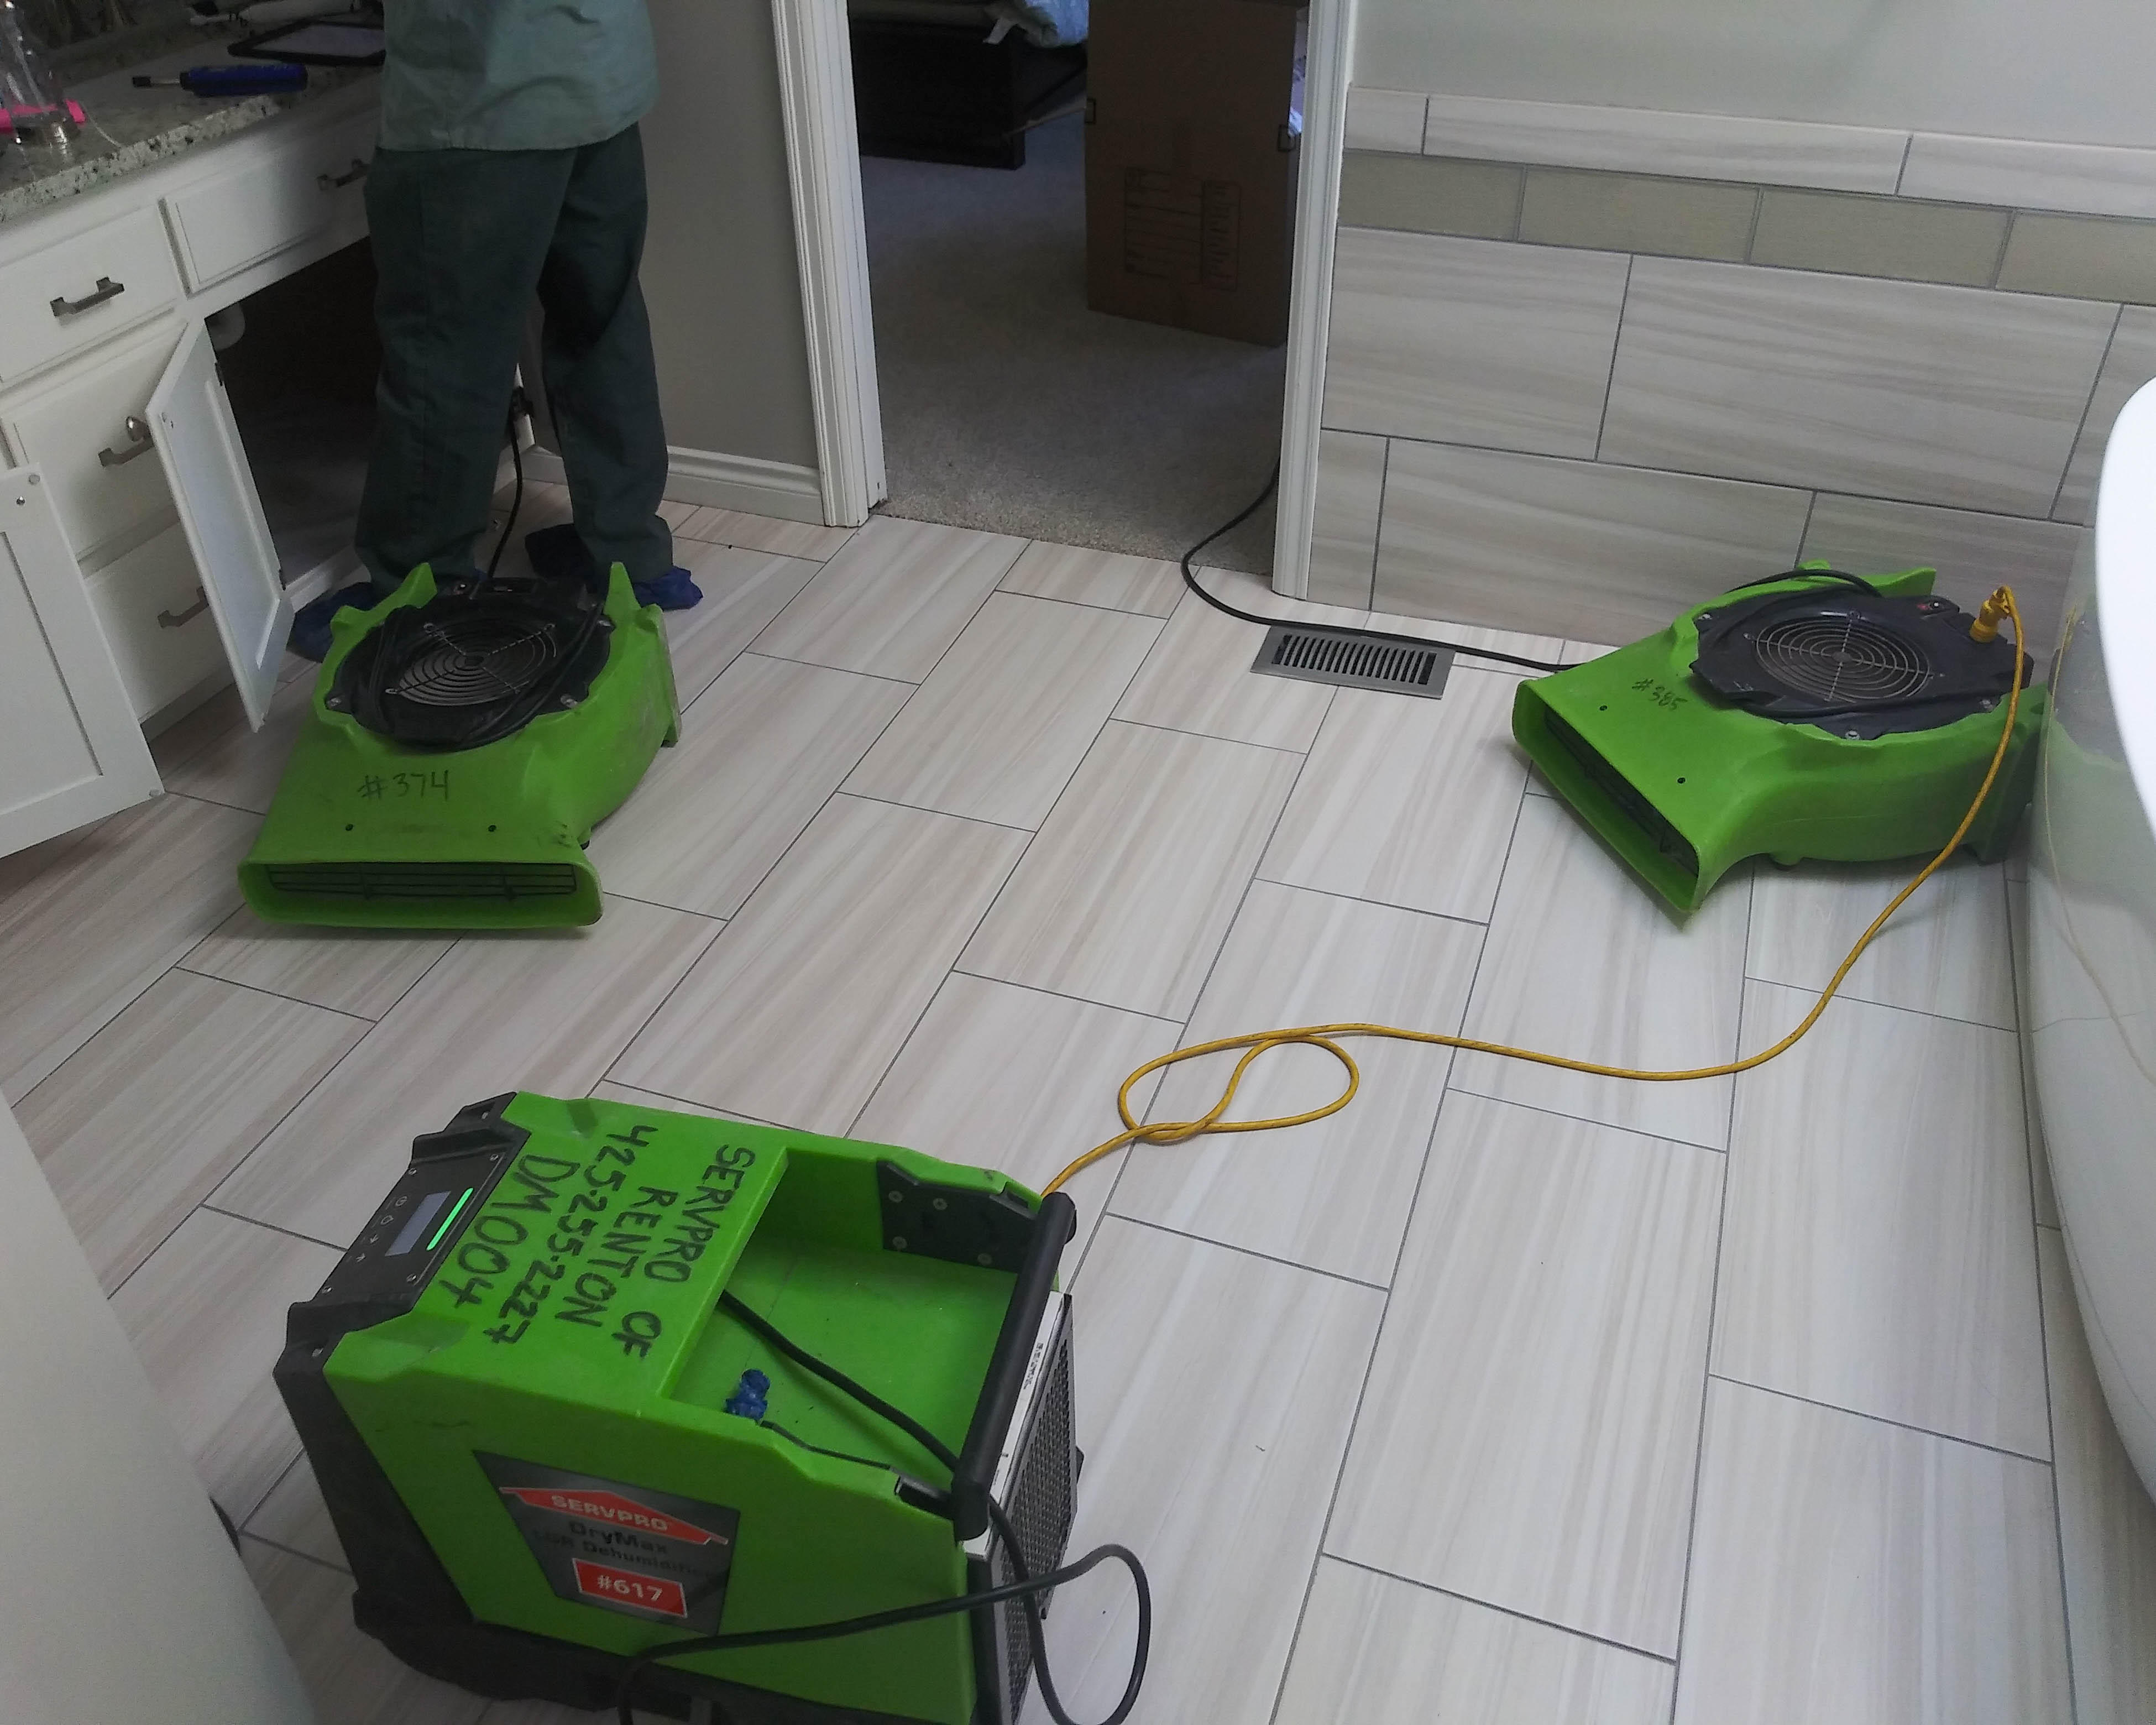 SERVPRO of Issaquah/North Bend is the best choice when it comes to selecting a restoration company to handle anything from fire, water, or mold damage.